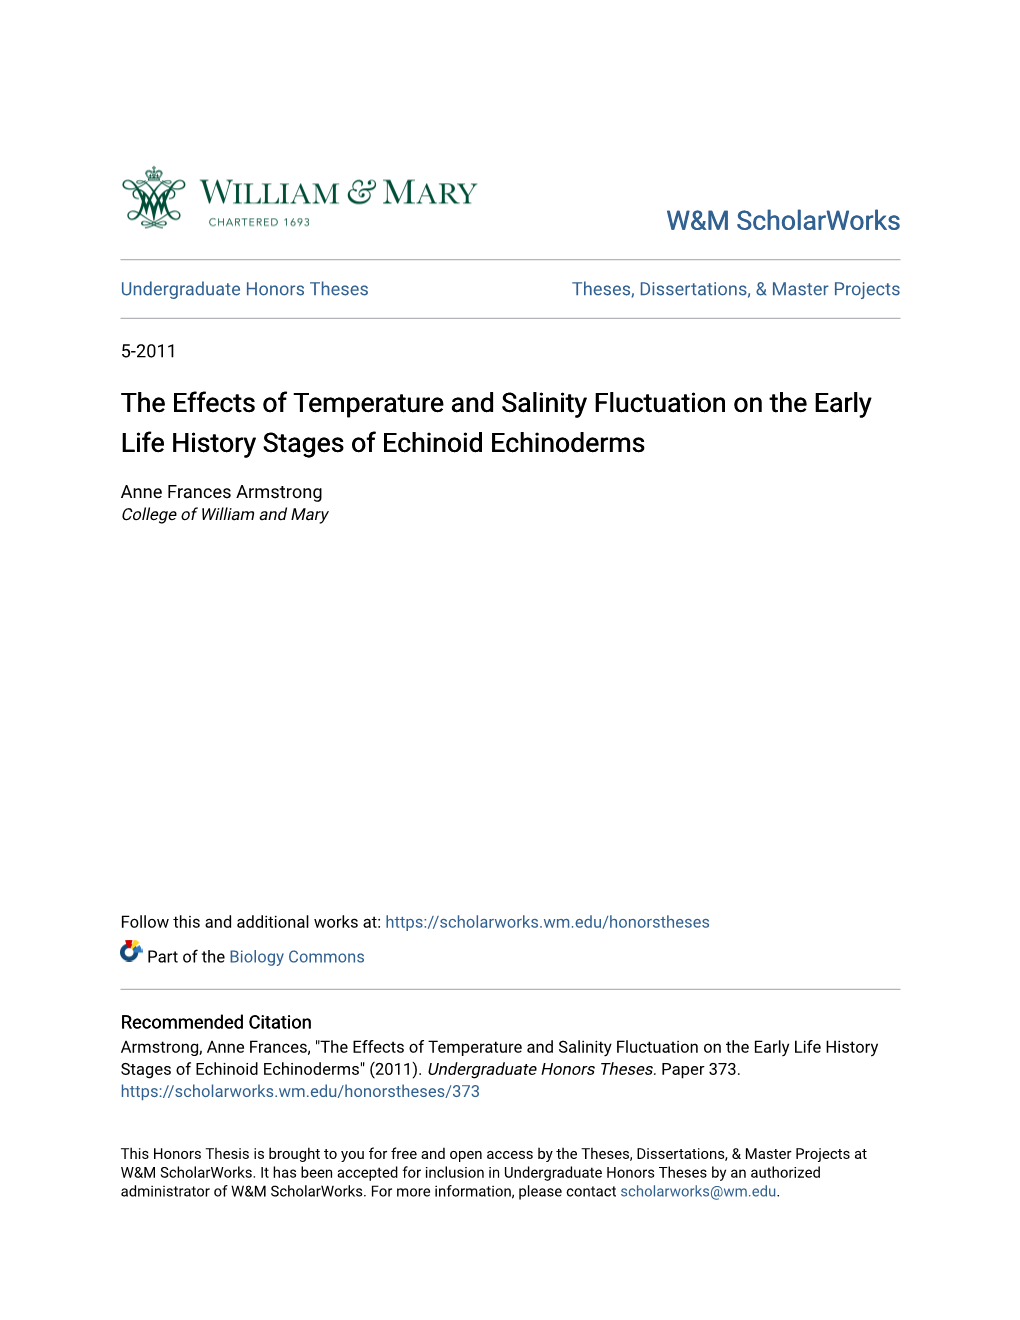 The Effects of Temperature and Salinity Fluctuation on the Early Life History Stages of Echinoid Echinoderms